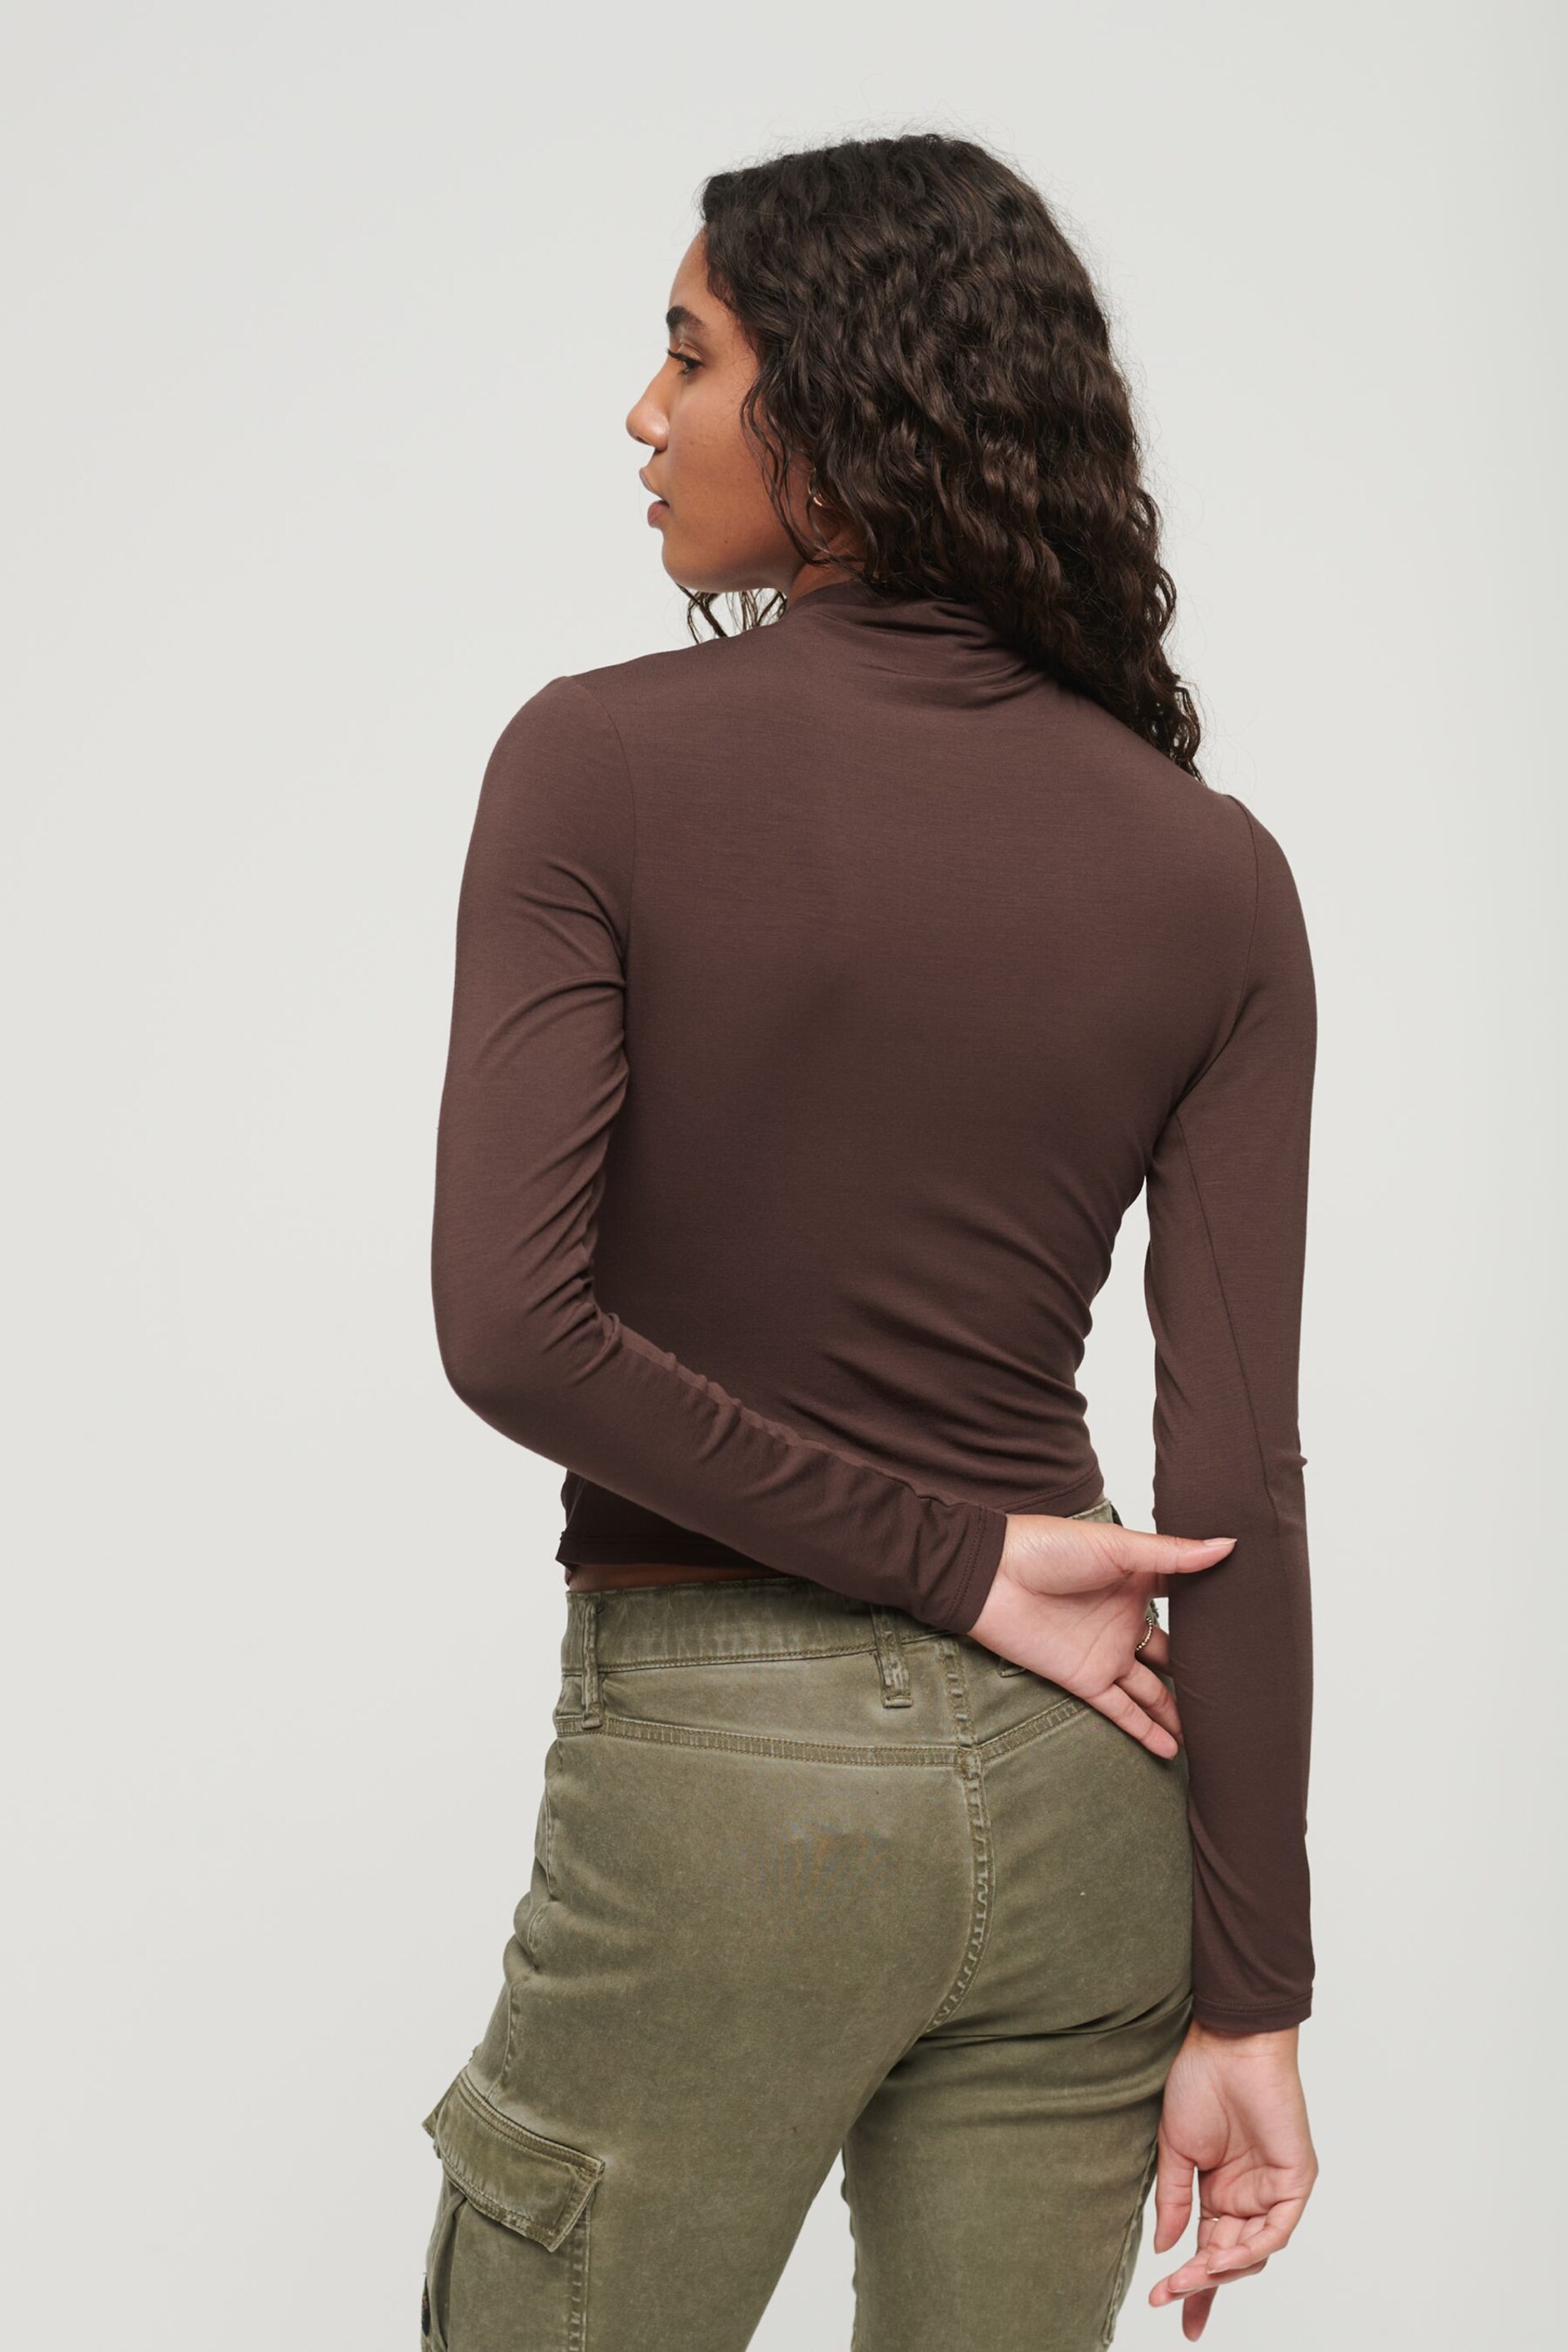 Superdry Brown Long Sleeve Ruched Mock Neck Top - Image 2 of 3